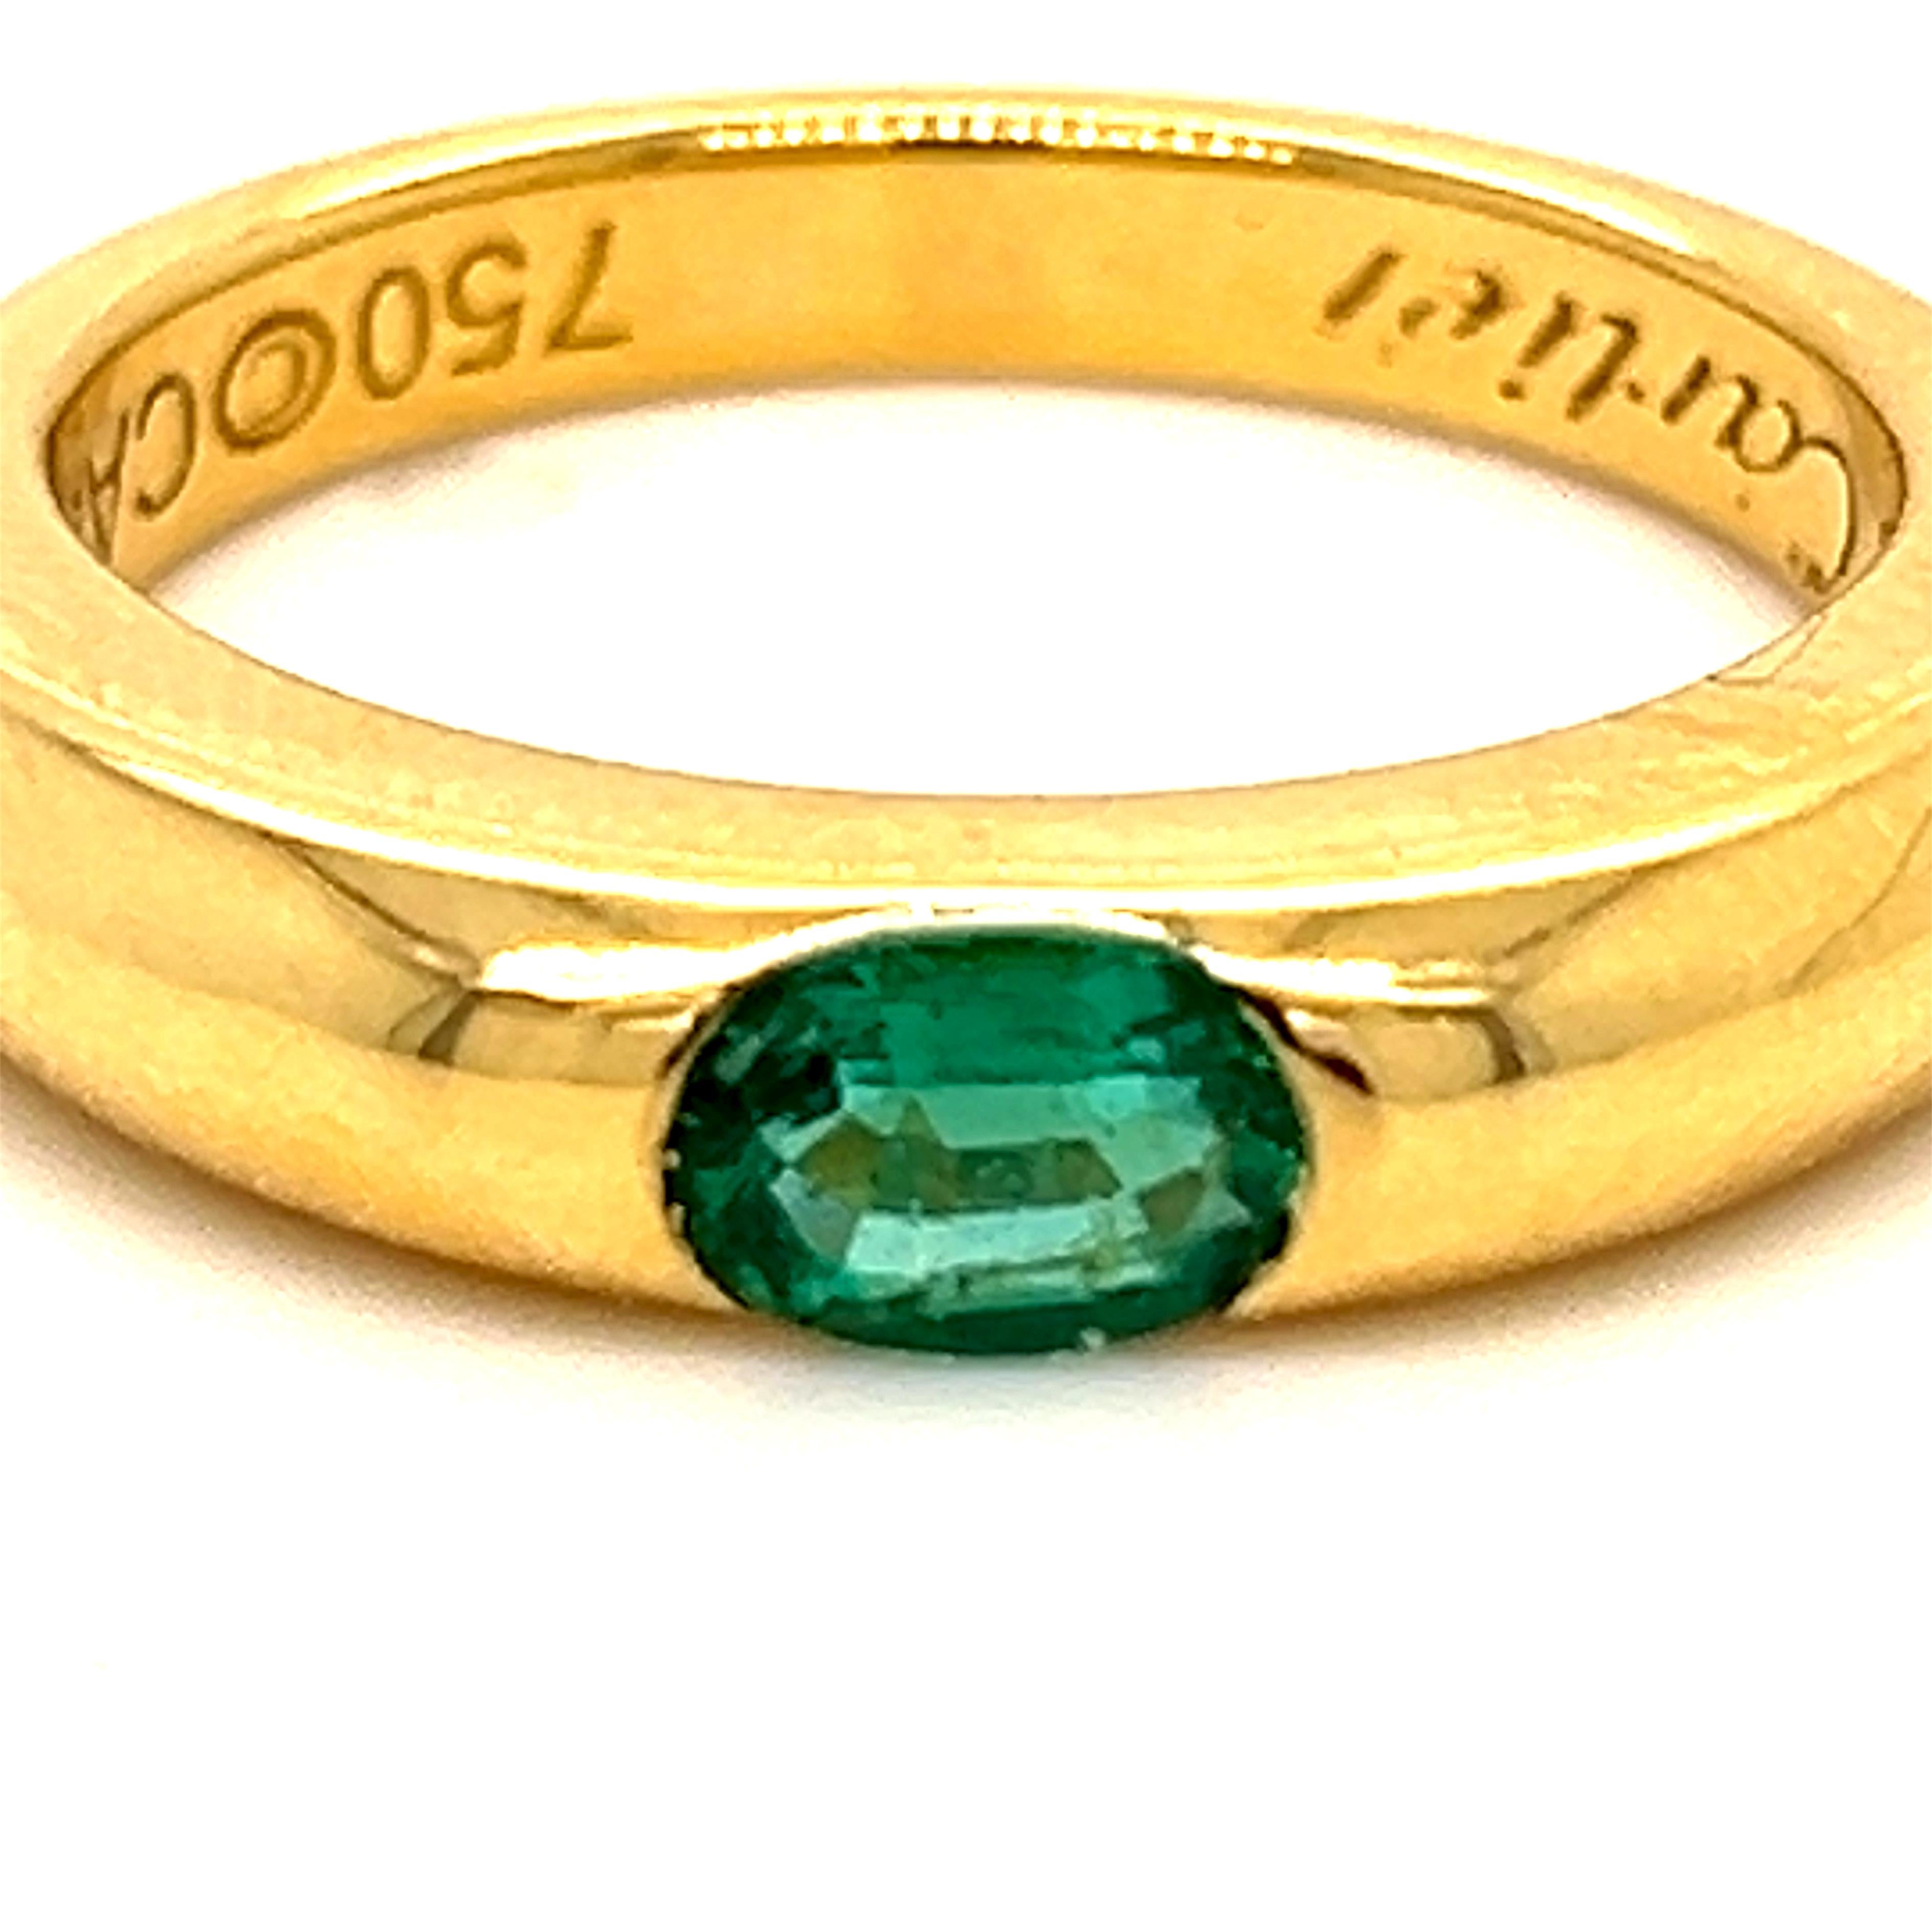 Original 1992, Cartier Oval  Natural Emerald 18Kt Yellow Gold iconic Ellipse ring, French size 54, Us Size 6 3/4.
A very precious Cartier circa 0.50KT Top Quality Oval Natural Emerald in a simple, all time wearable 18kt yellow gold setting timeless